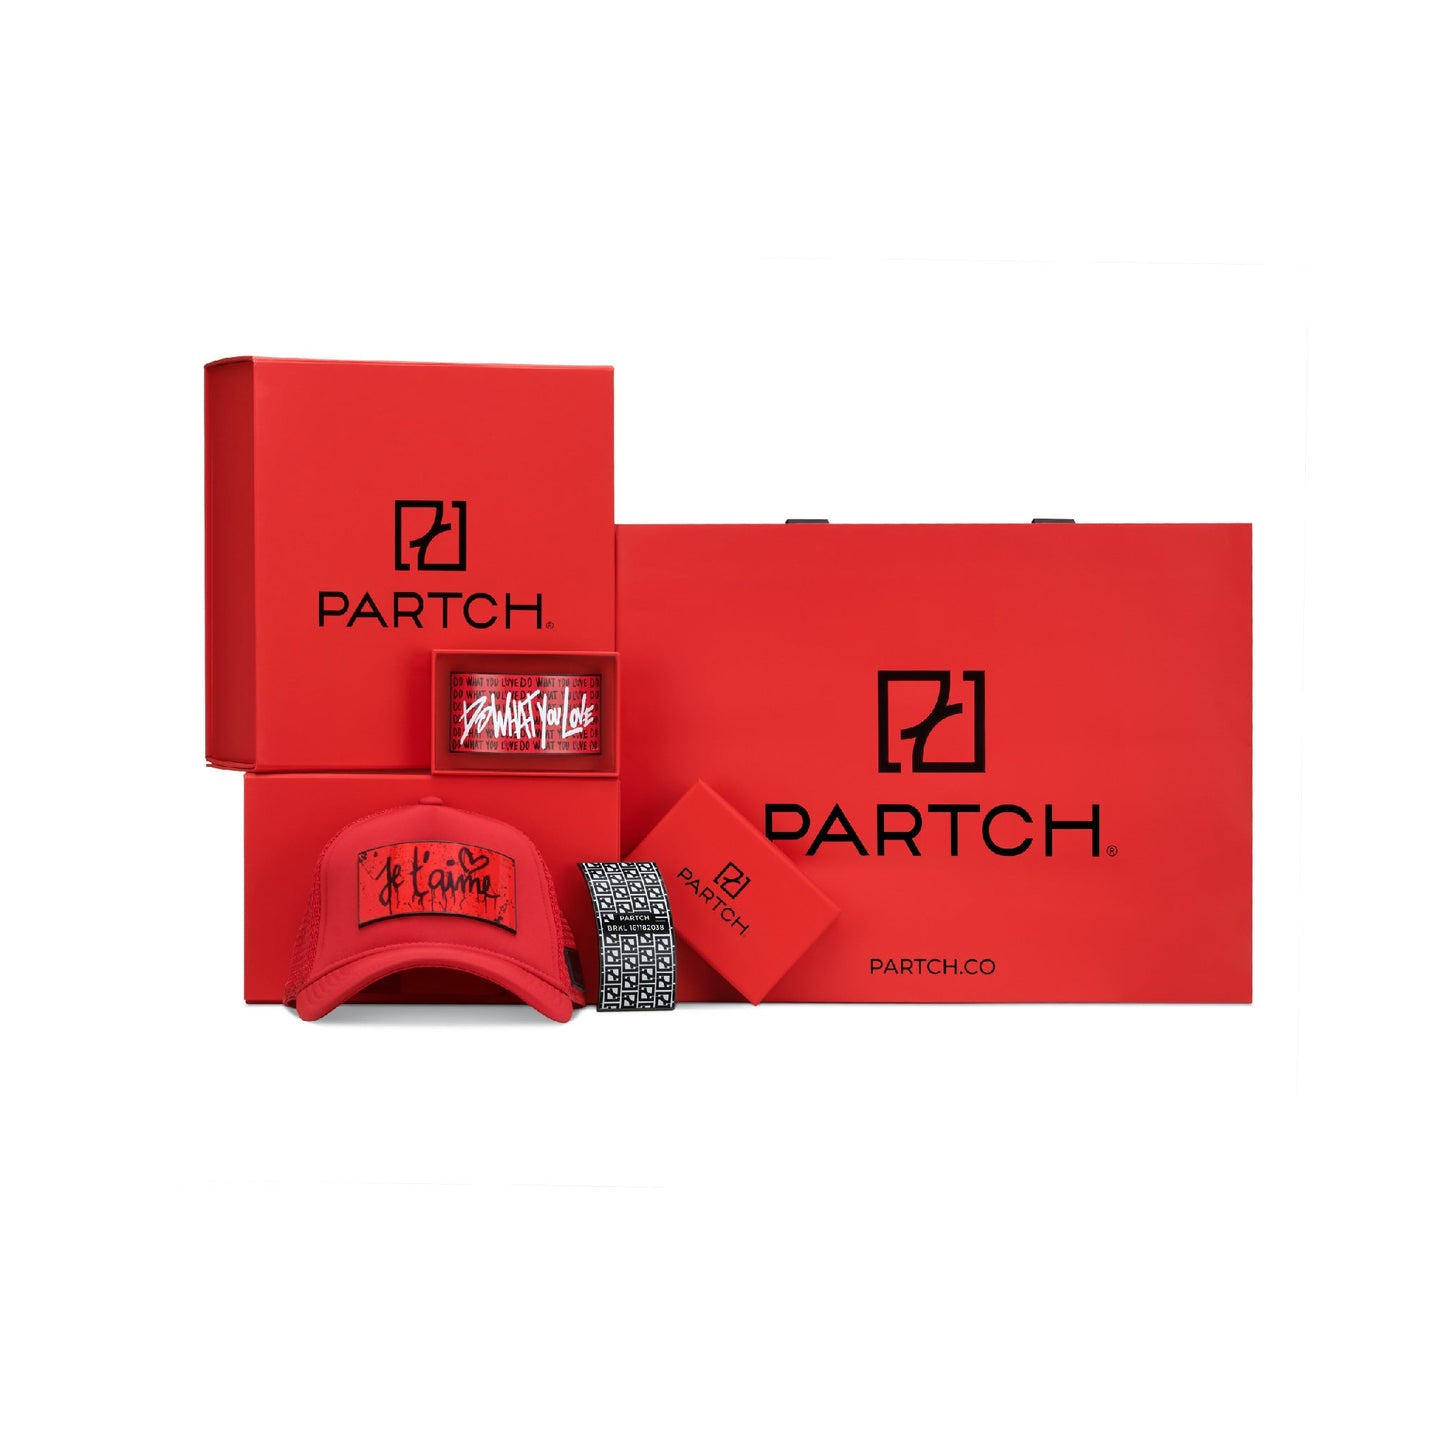 PARTCH | Set Luxury Packaging Partch. Shopping bag, boxes, hats, caps.